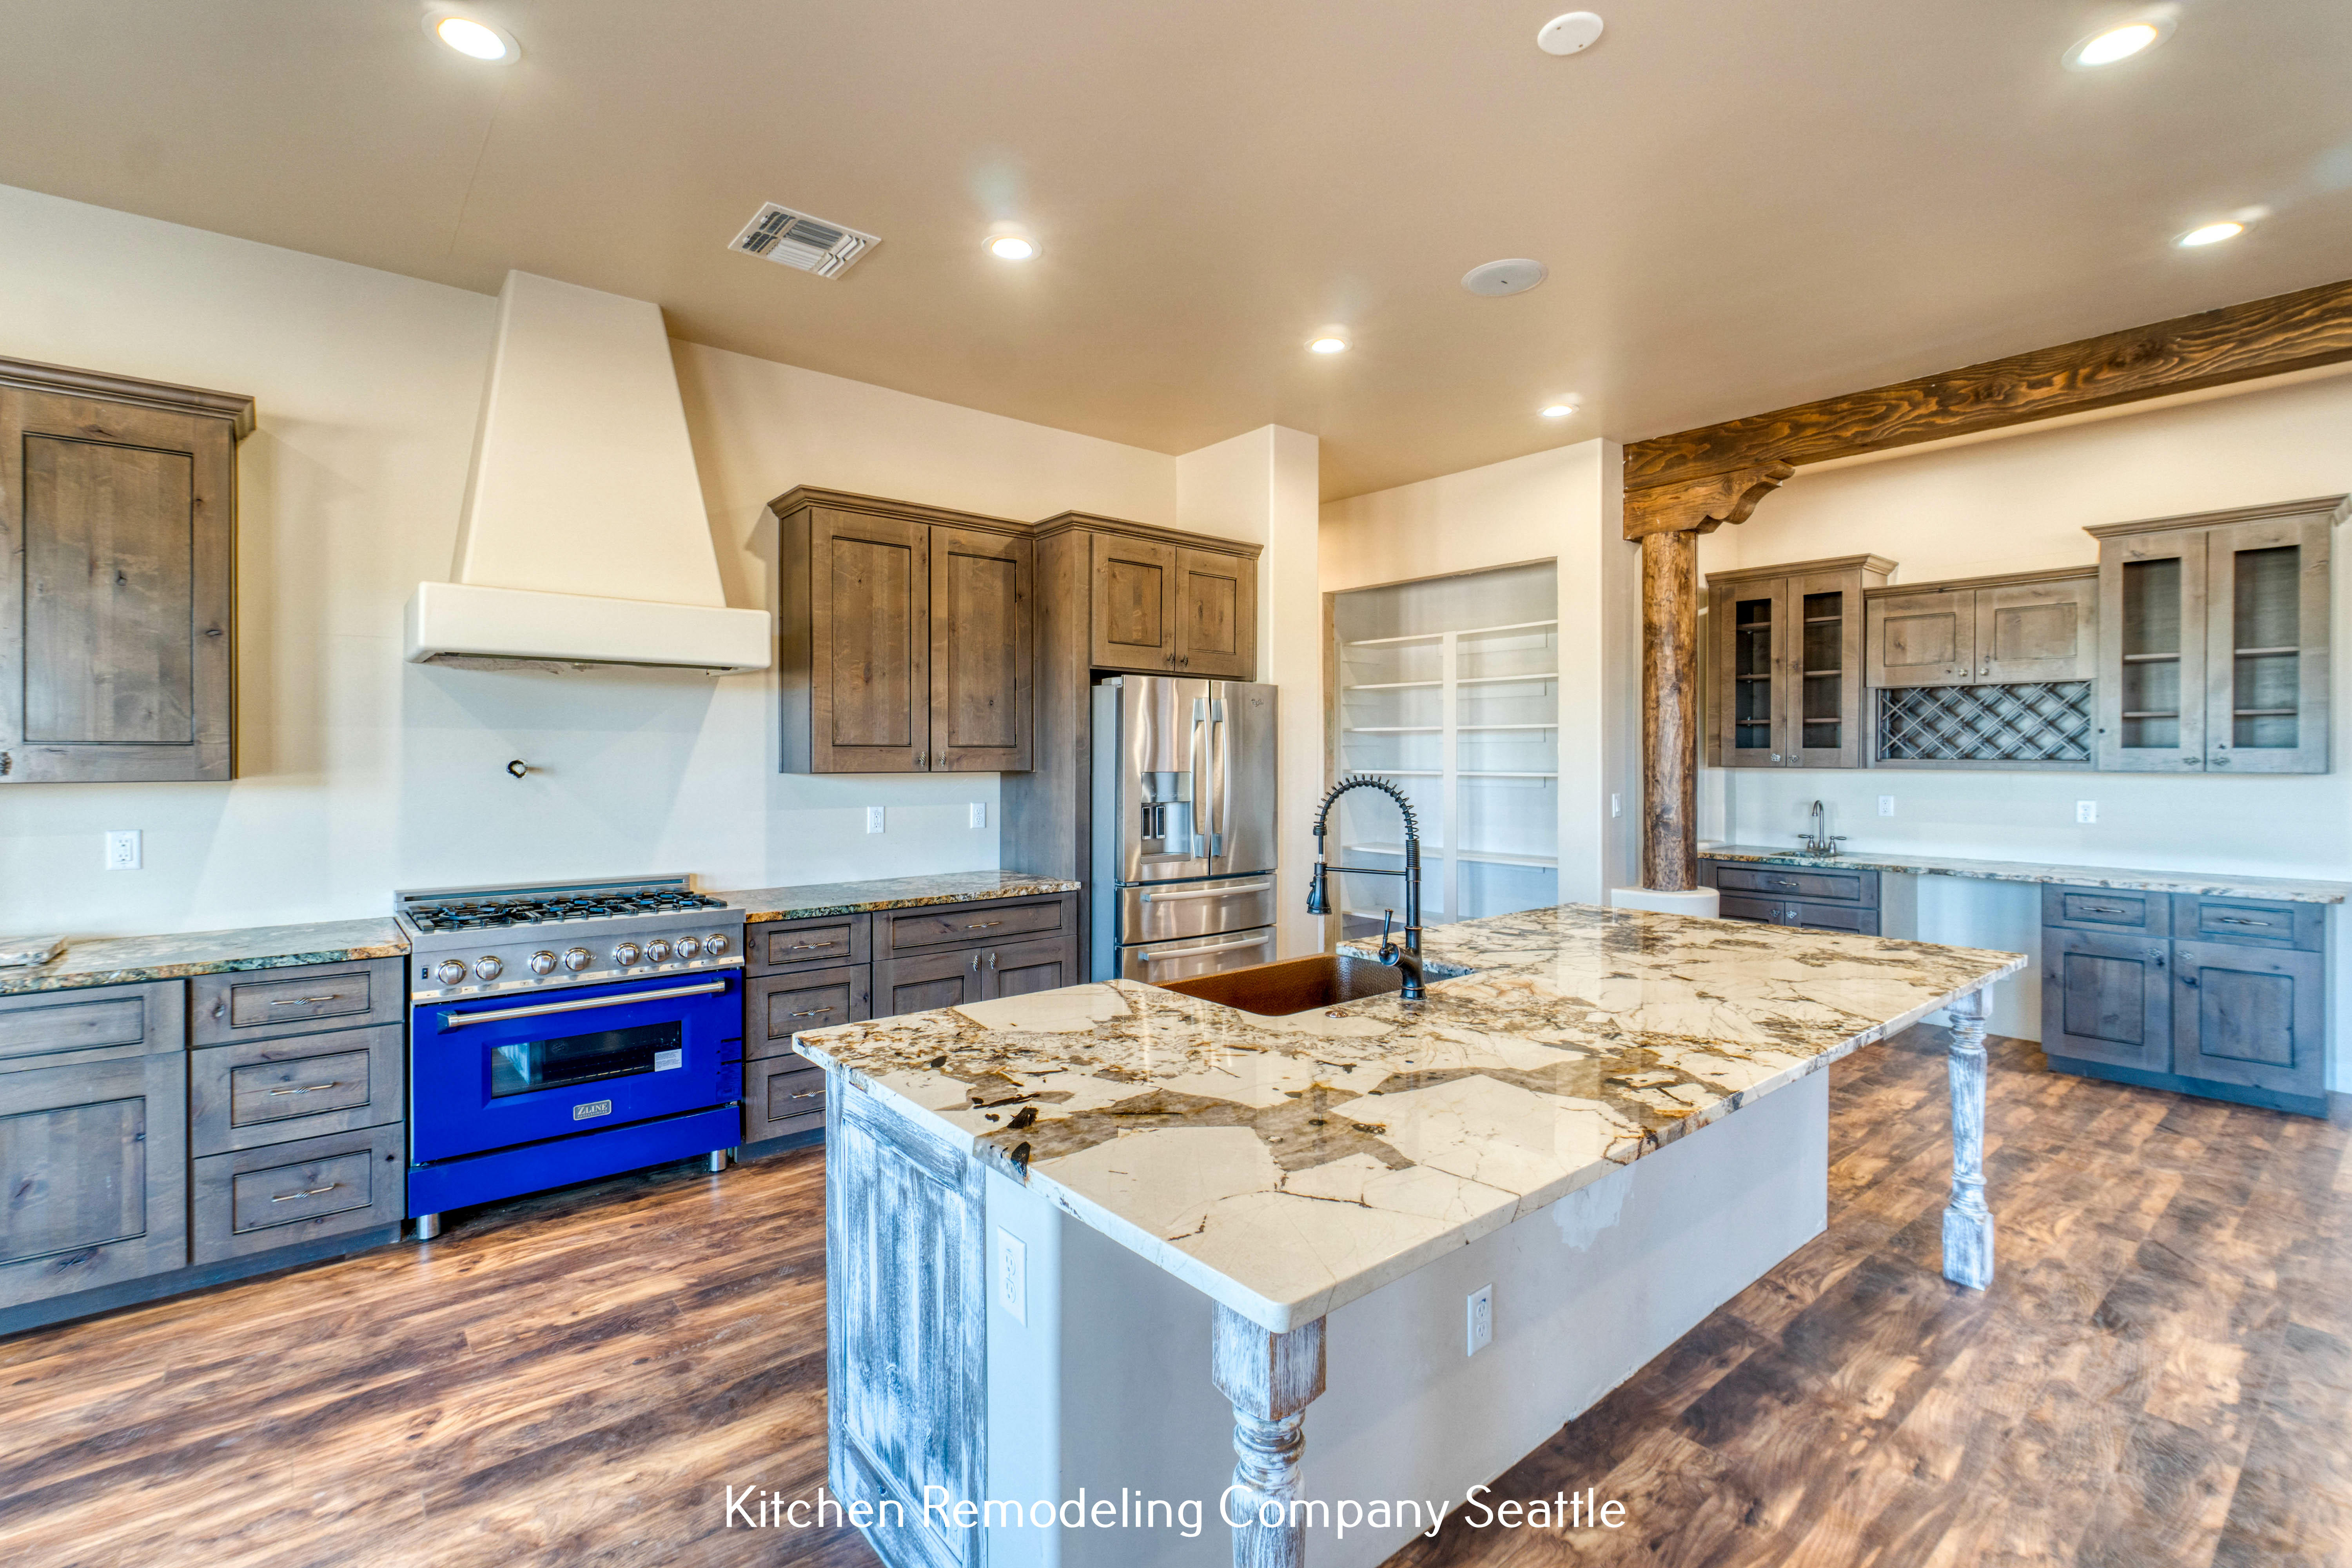 Unique Home Construction Shares Reasons a Kitchen Island is a Good Idea